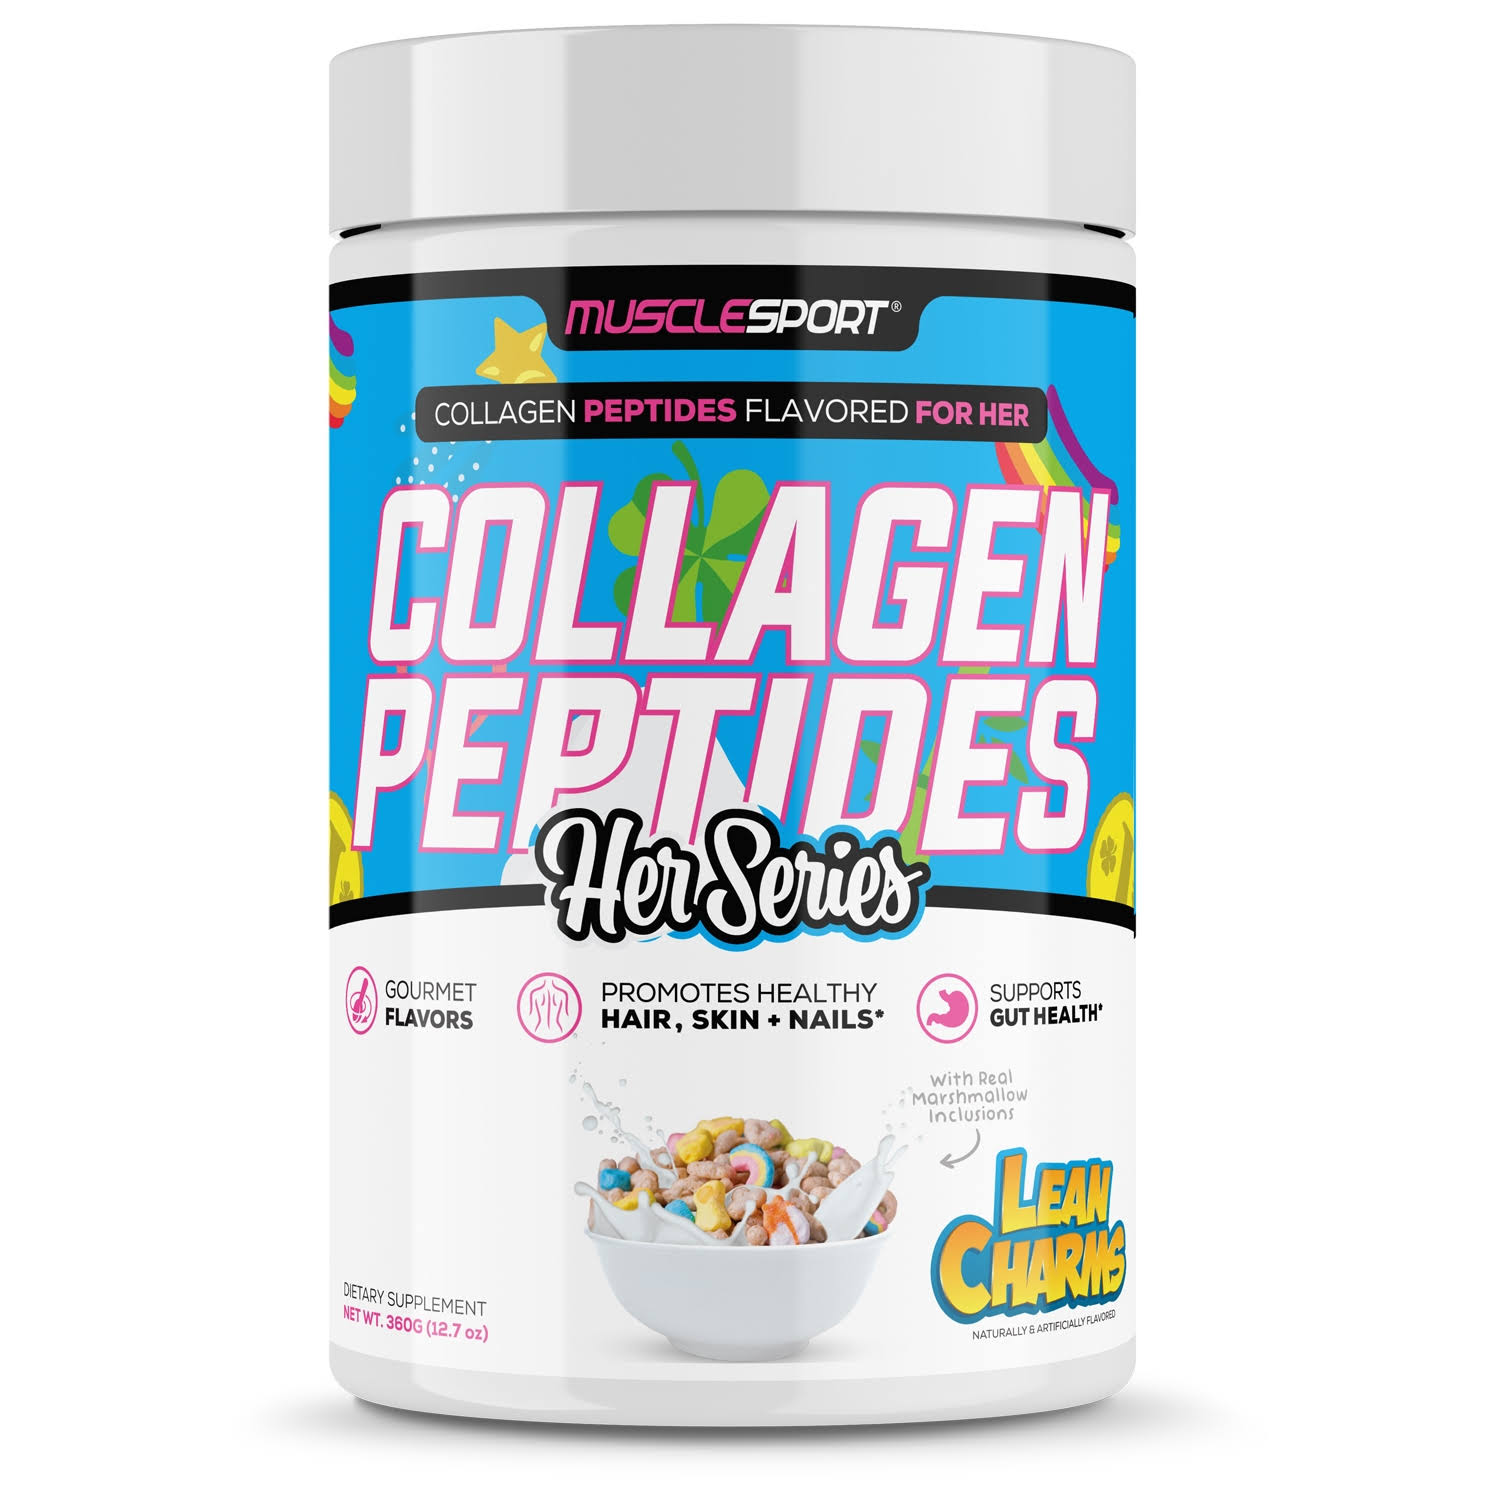 Musclesport Collagen Peptides Her Series Lean Charms 360g 30 Servings | by NetNutri